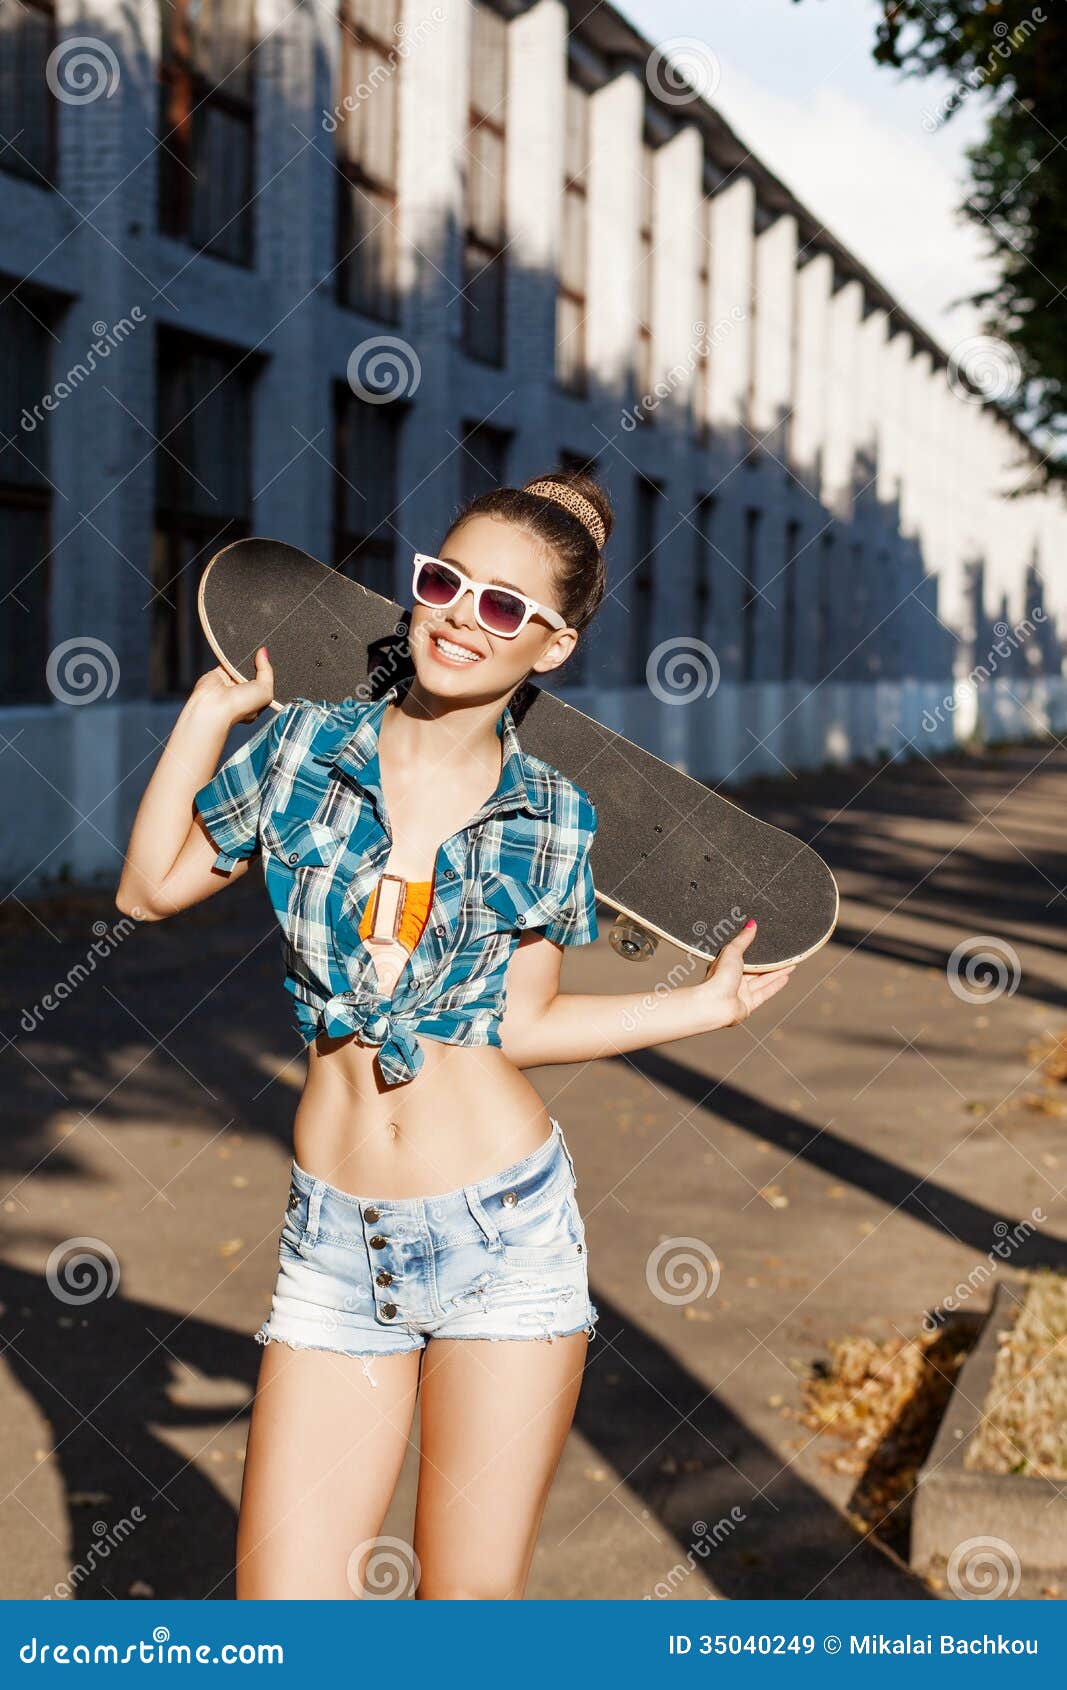 Beautiful Lady With Skateboard In The City Stock Image 